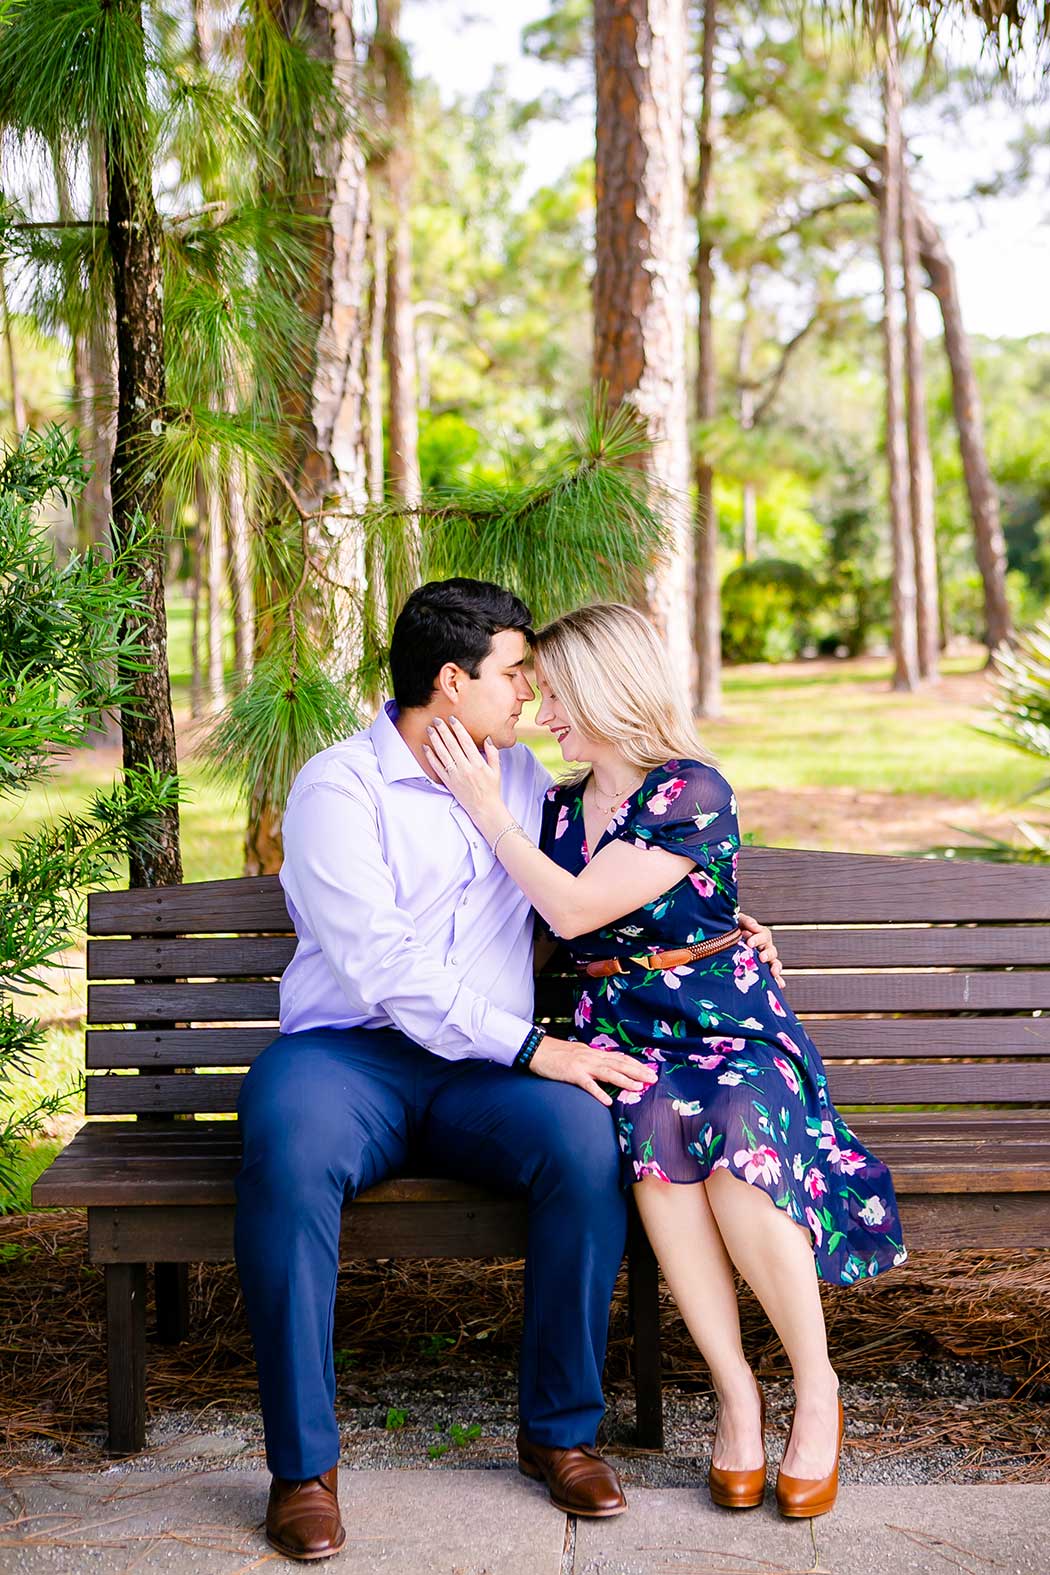 girl in navy floral dress poses for engagement photographs on wooden bench | morikami engagement photographs | engagement photography at morikami japanese gardens